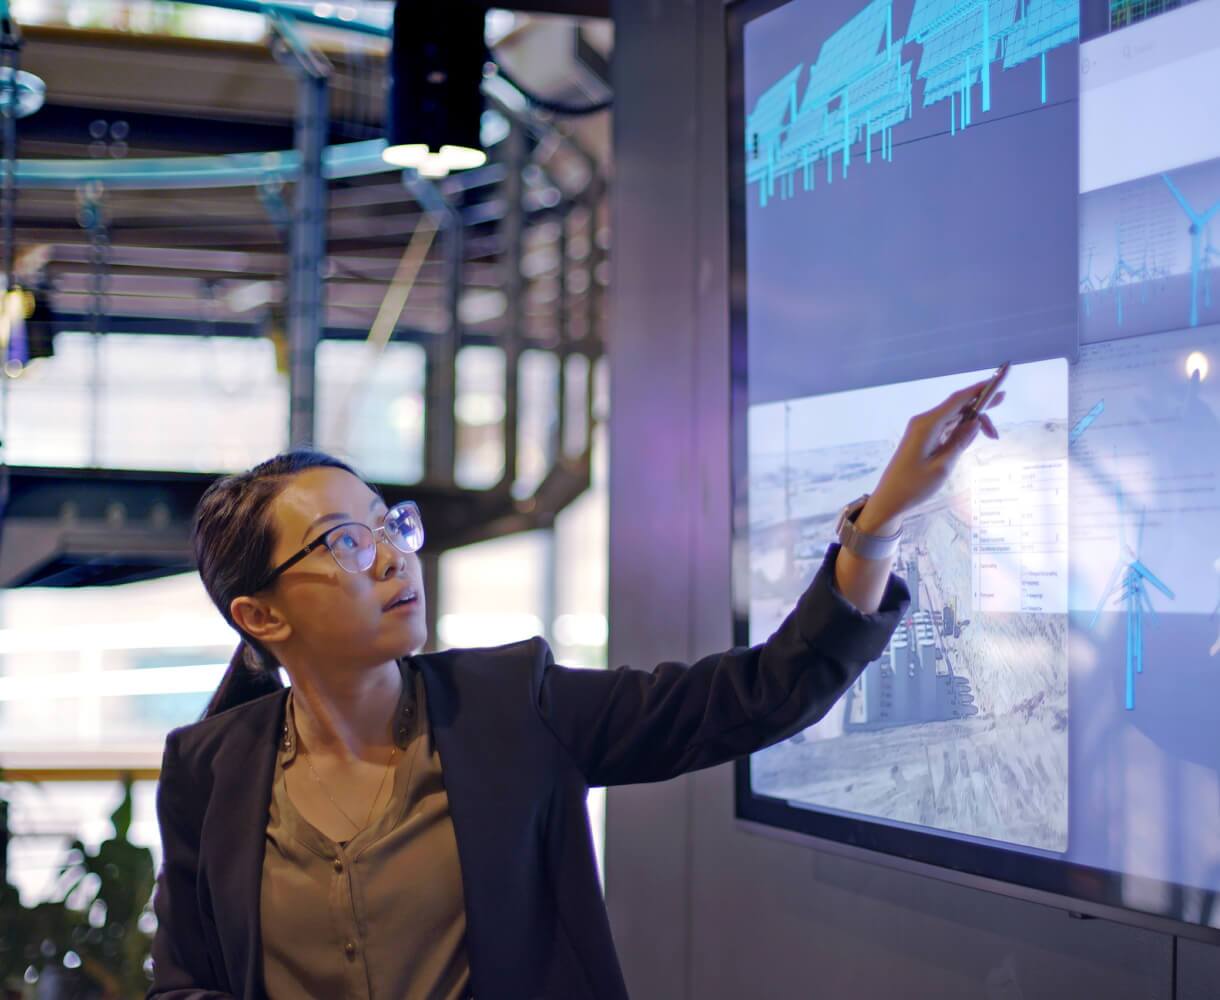 A woman in business attire points to data on a digital display in an industrial setting.